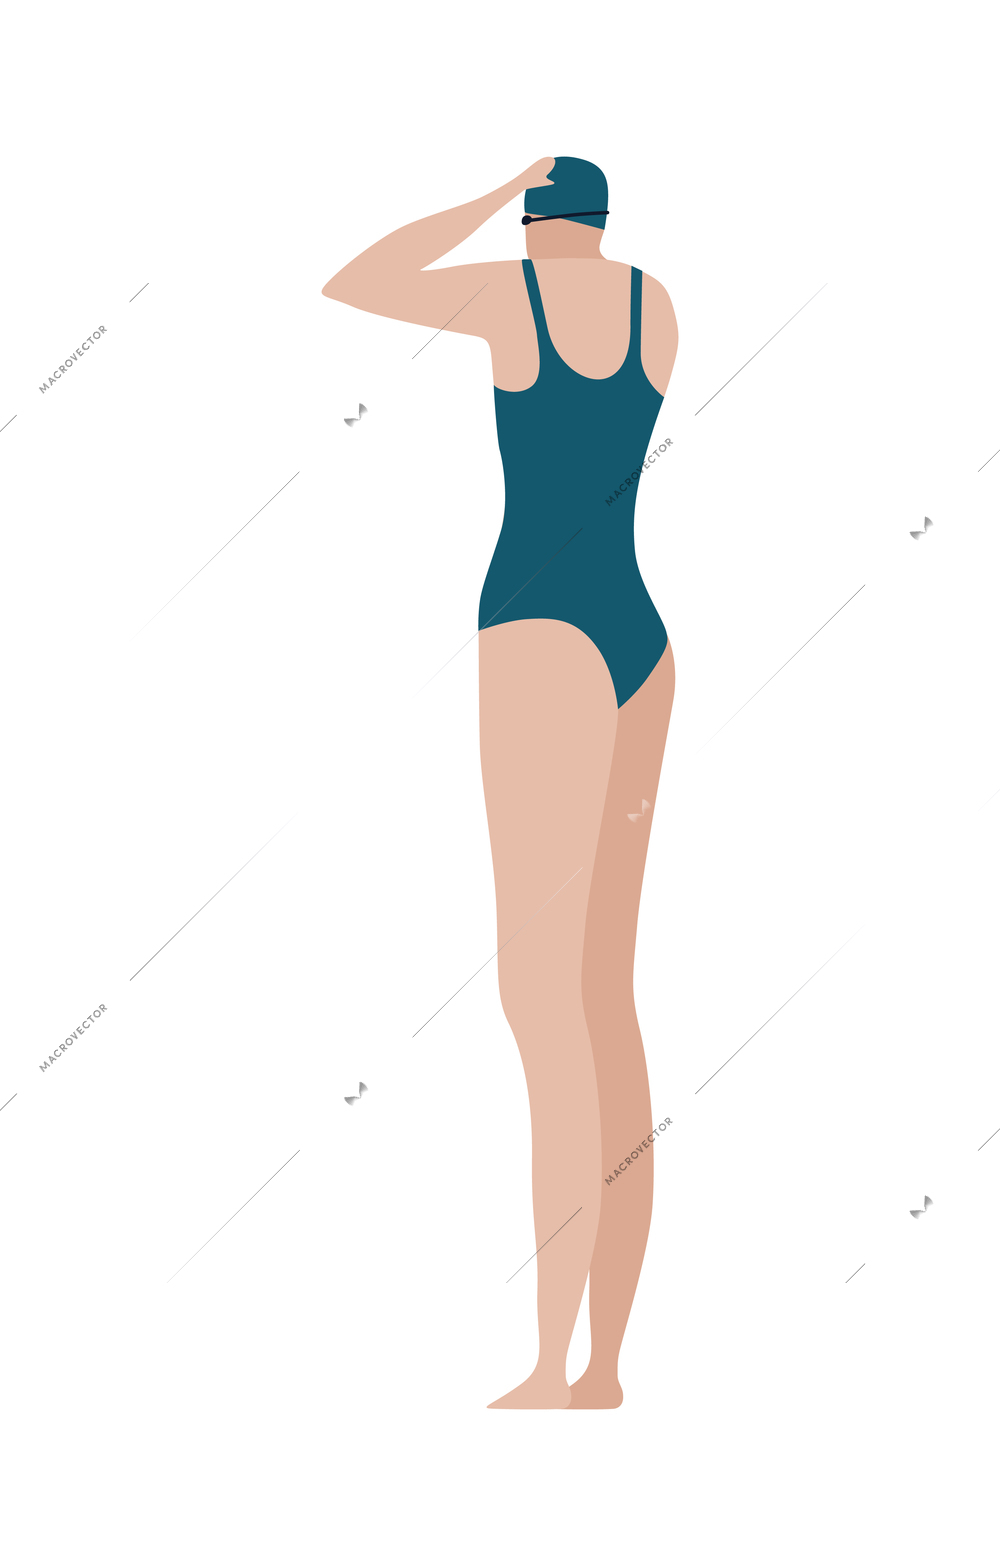 Swim pool people composition with isolated human character of woman in swimsuit wearing swimming hat vector illustration